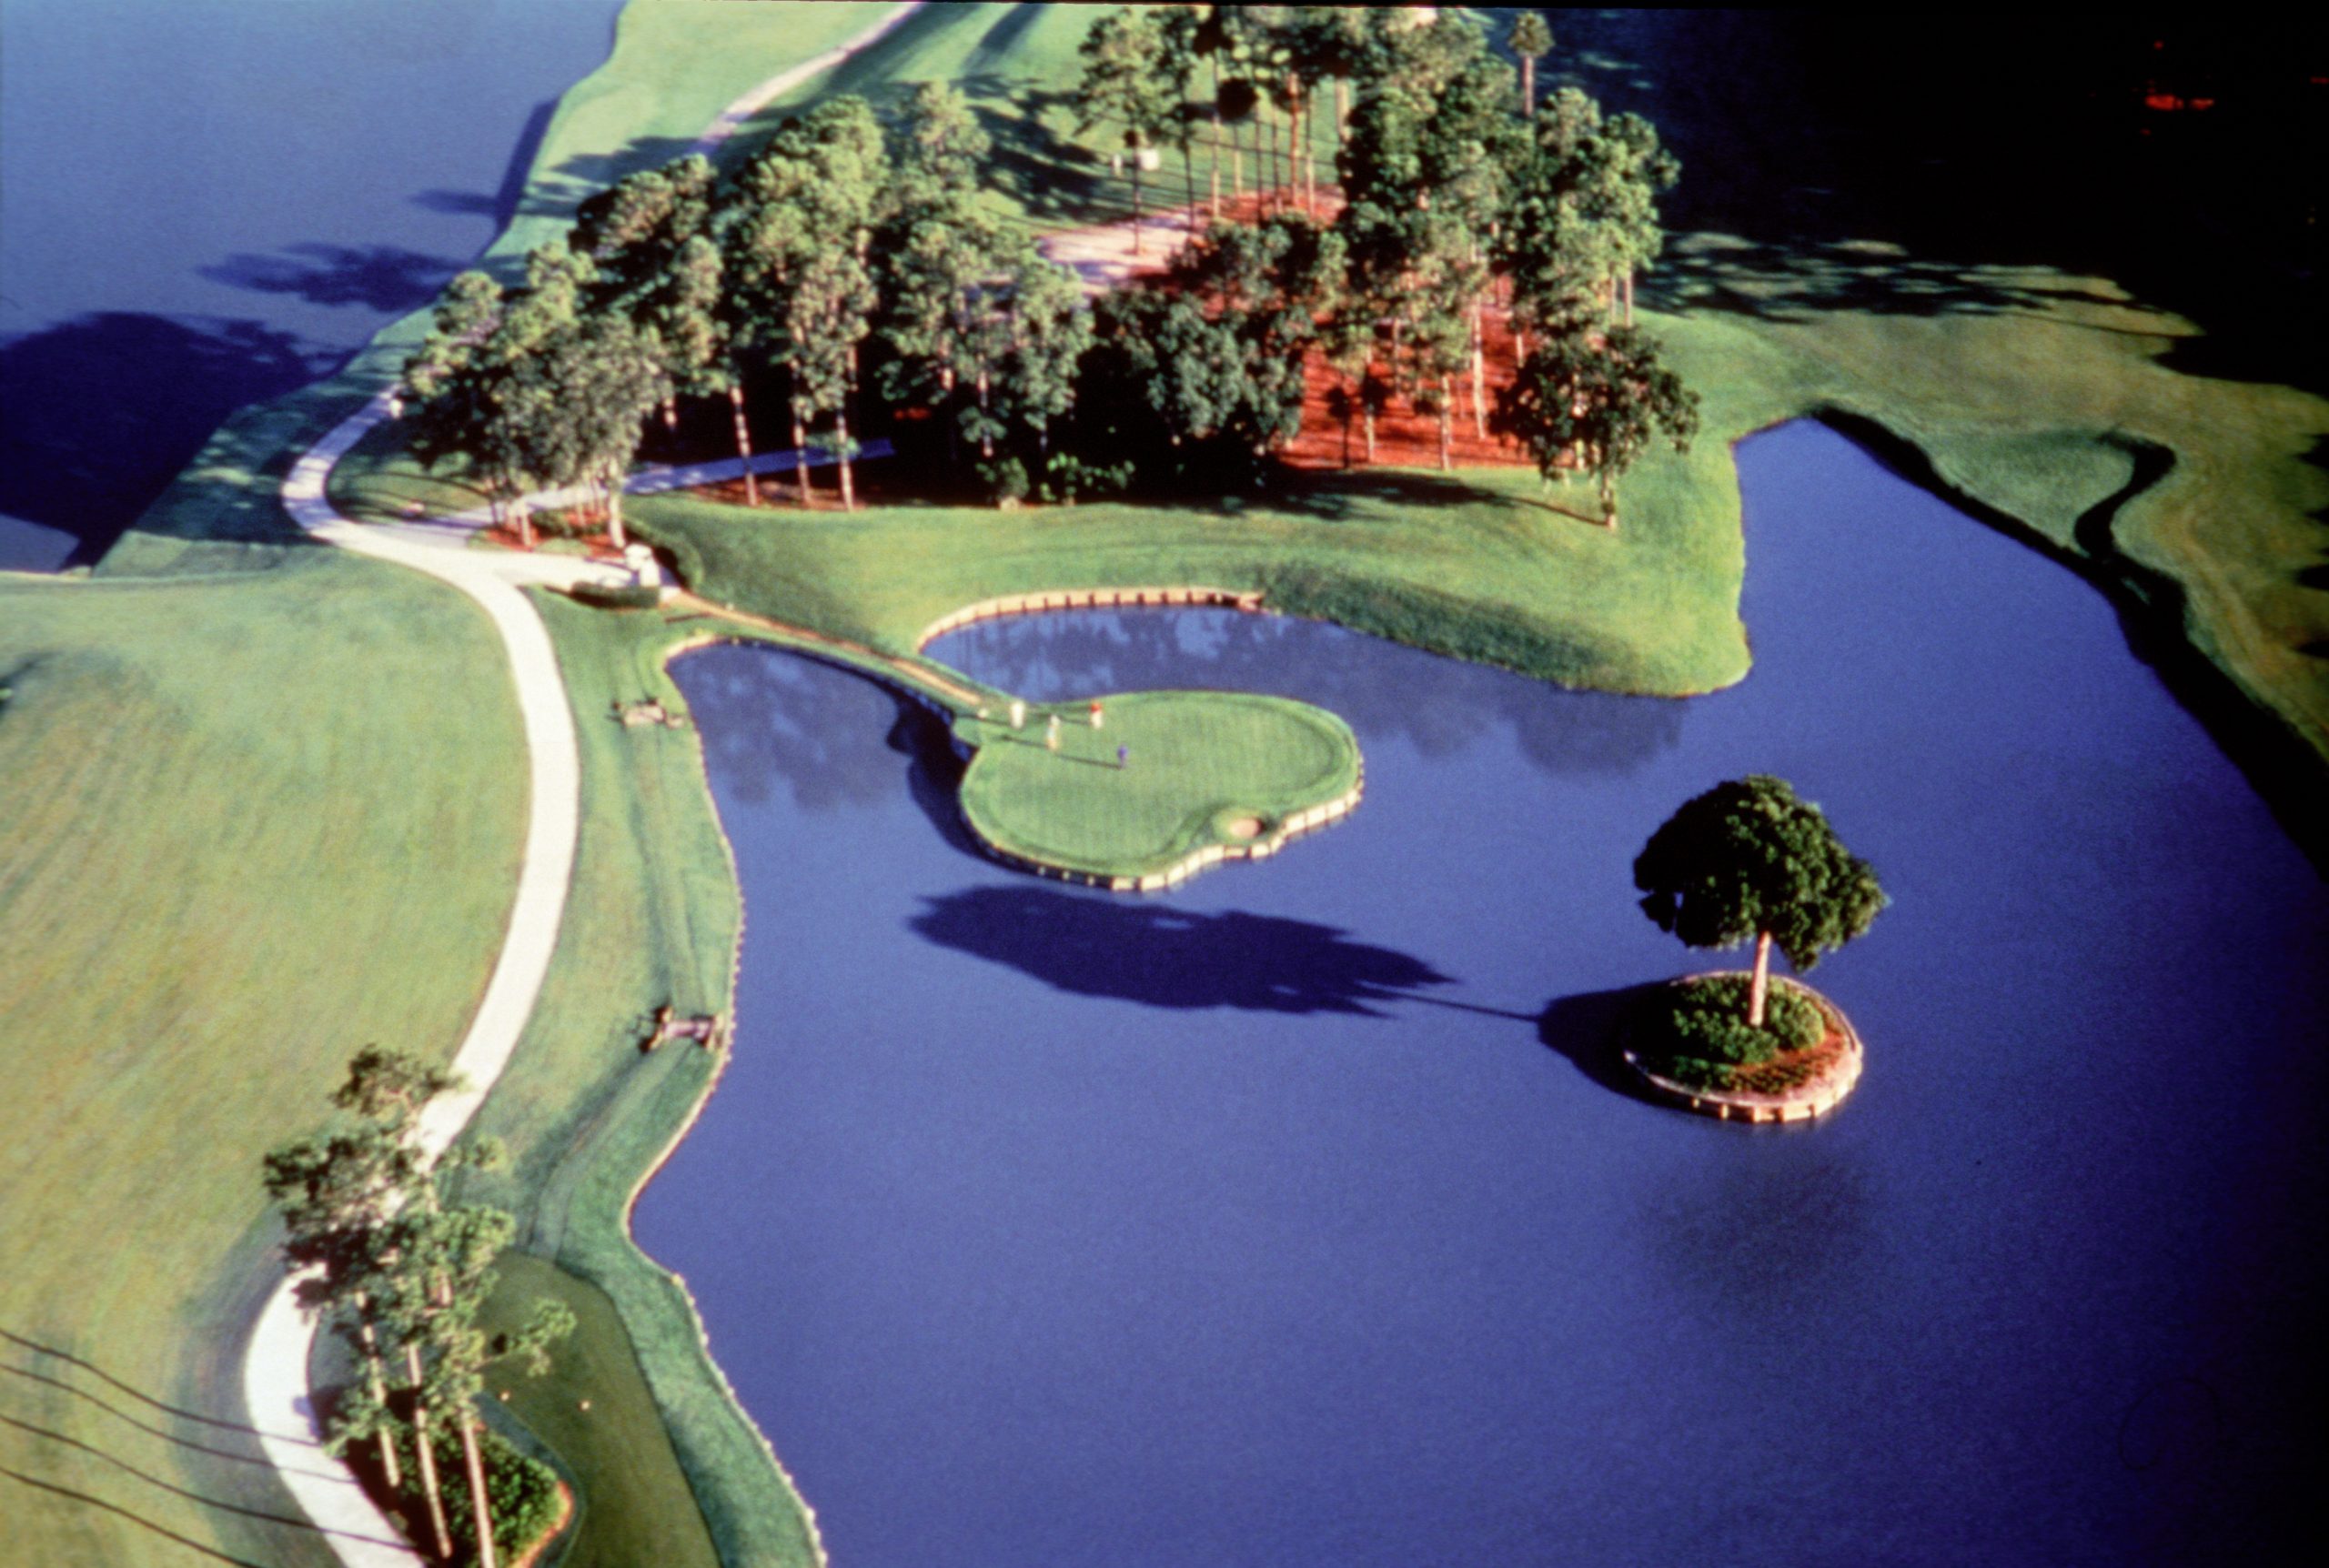 TPC Sawgrass, host of the Players Championship